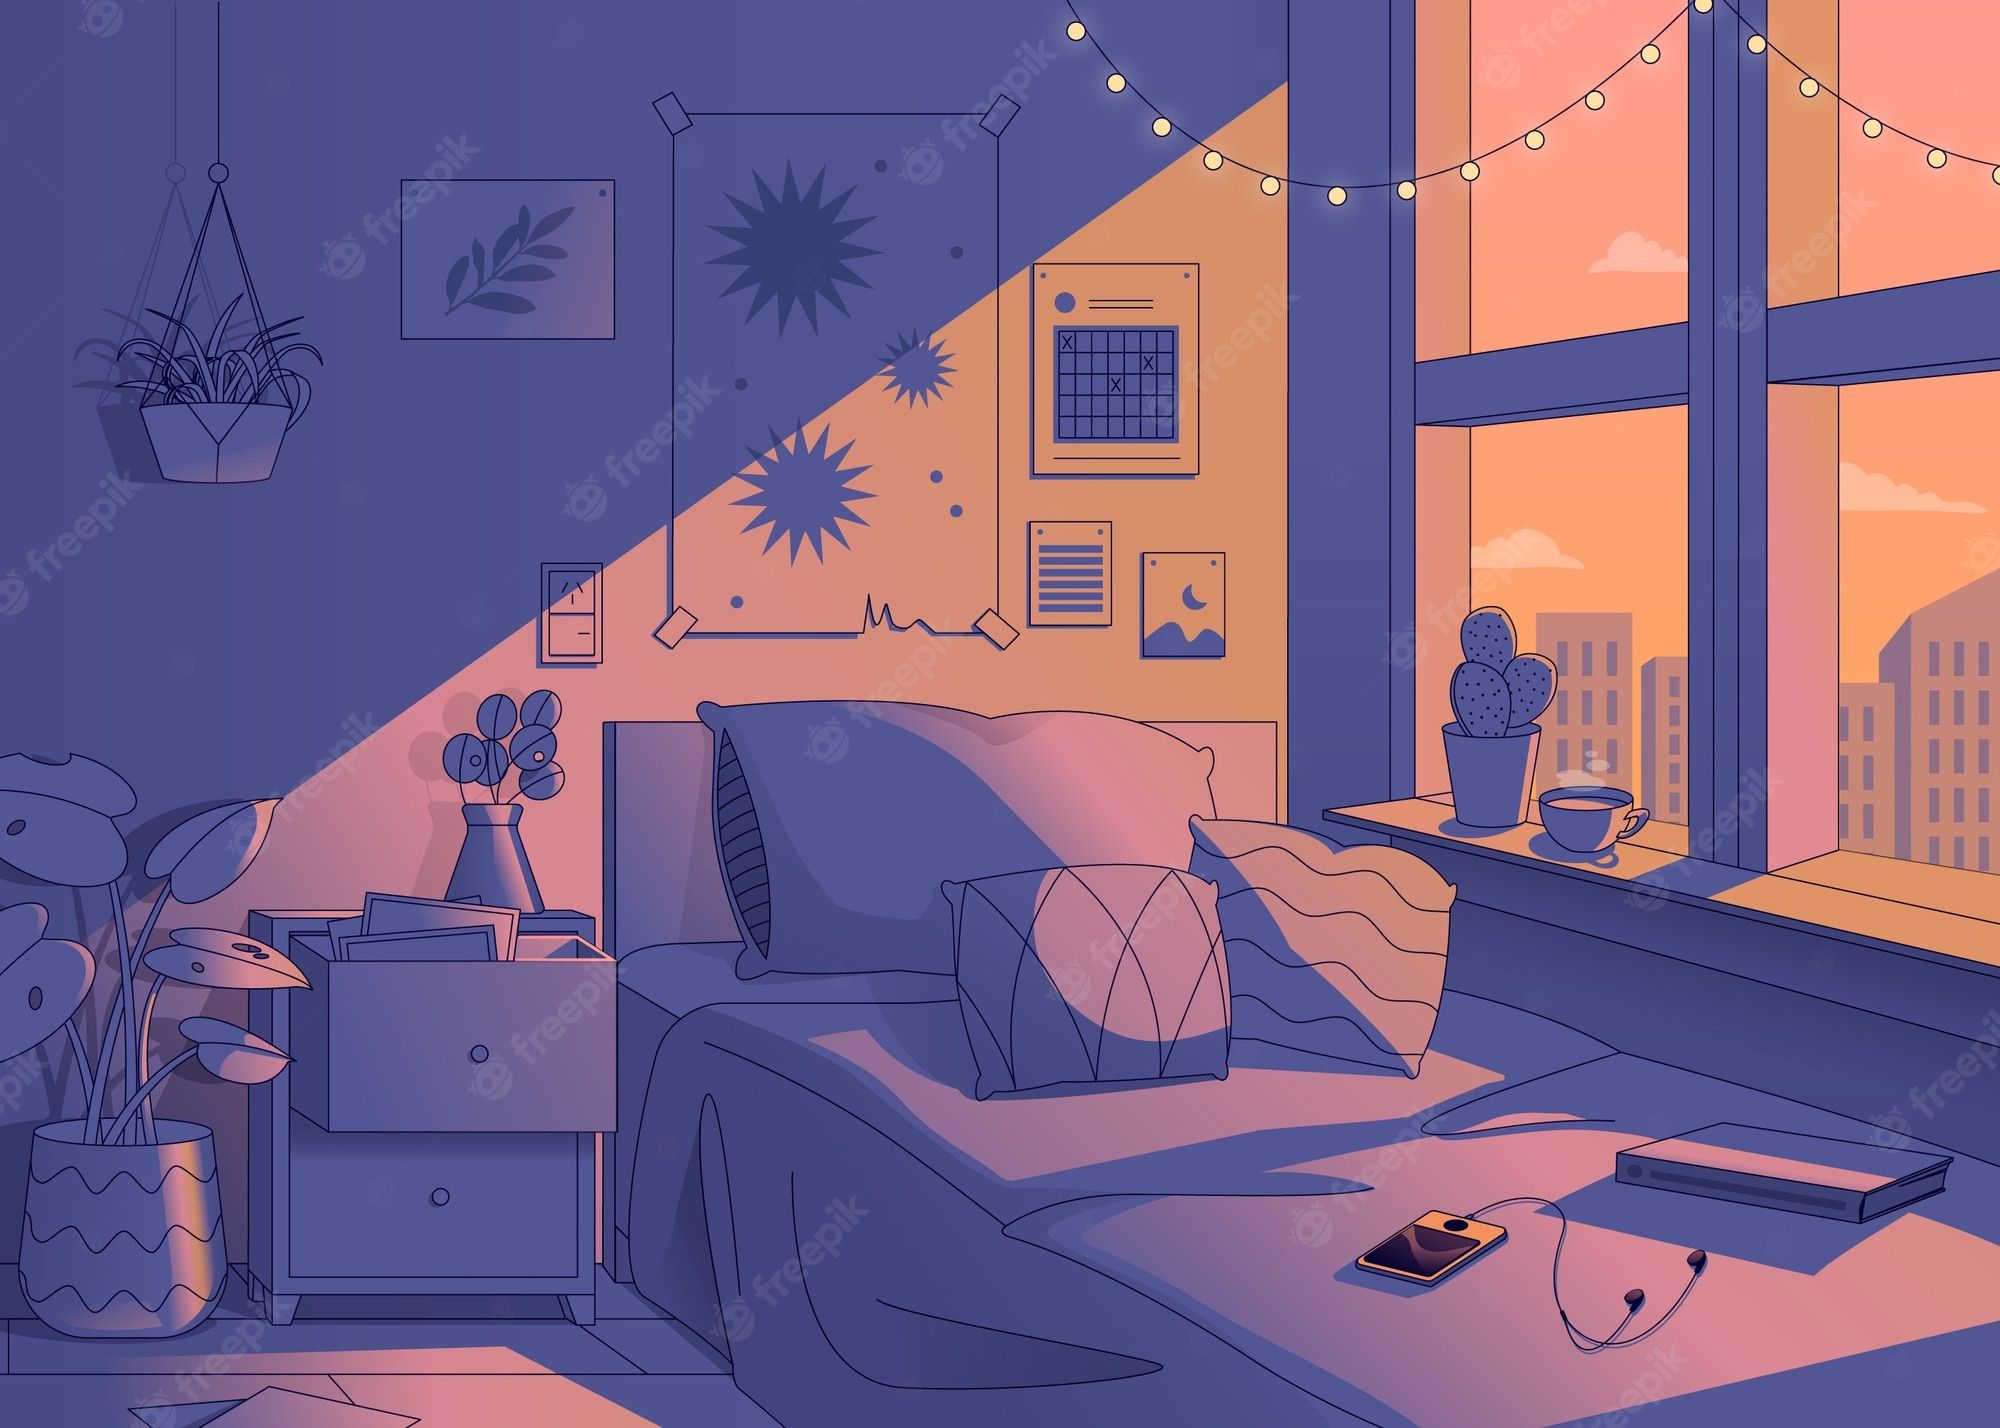 Illustration of a bedroom with a large window - Lo fi